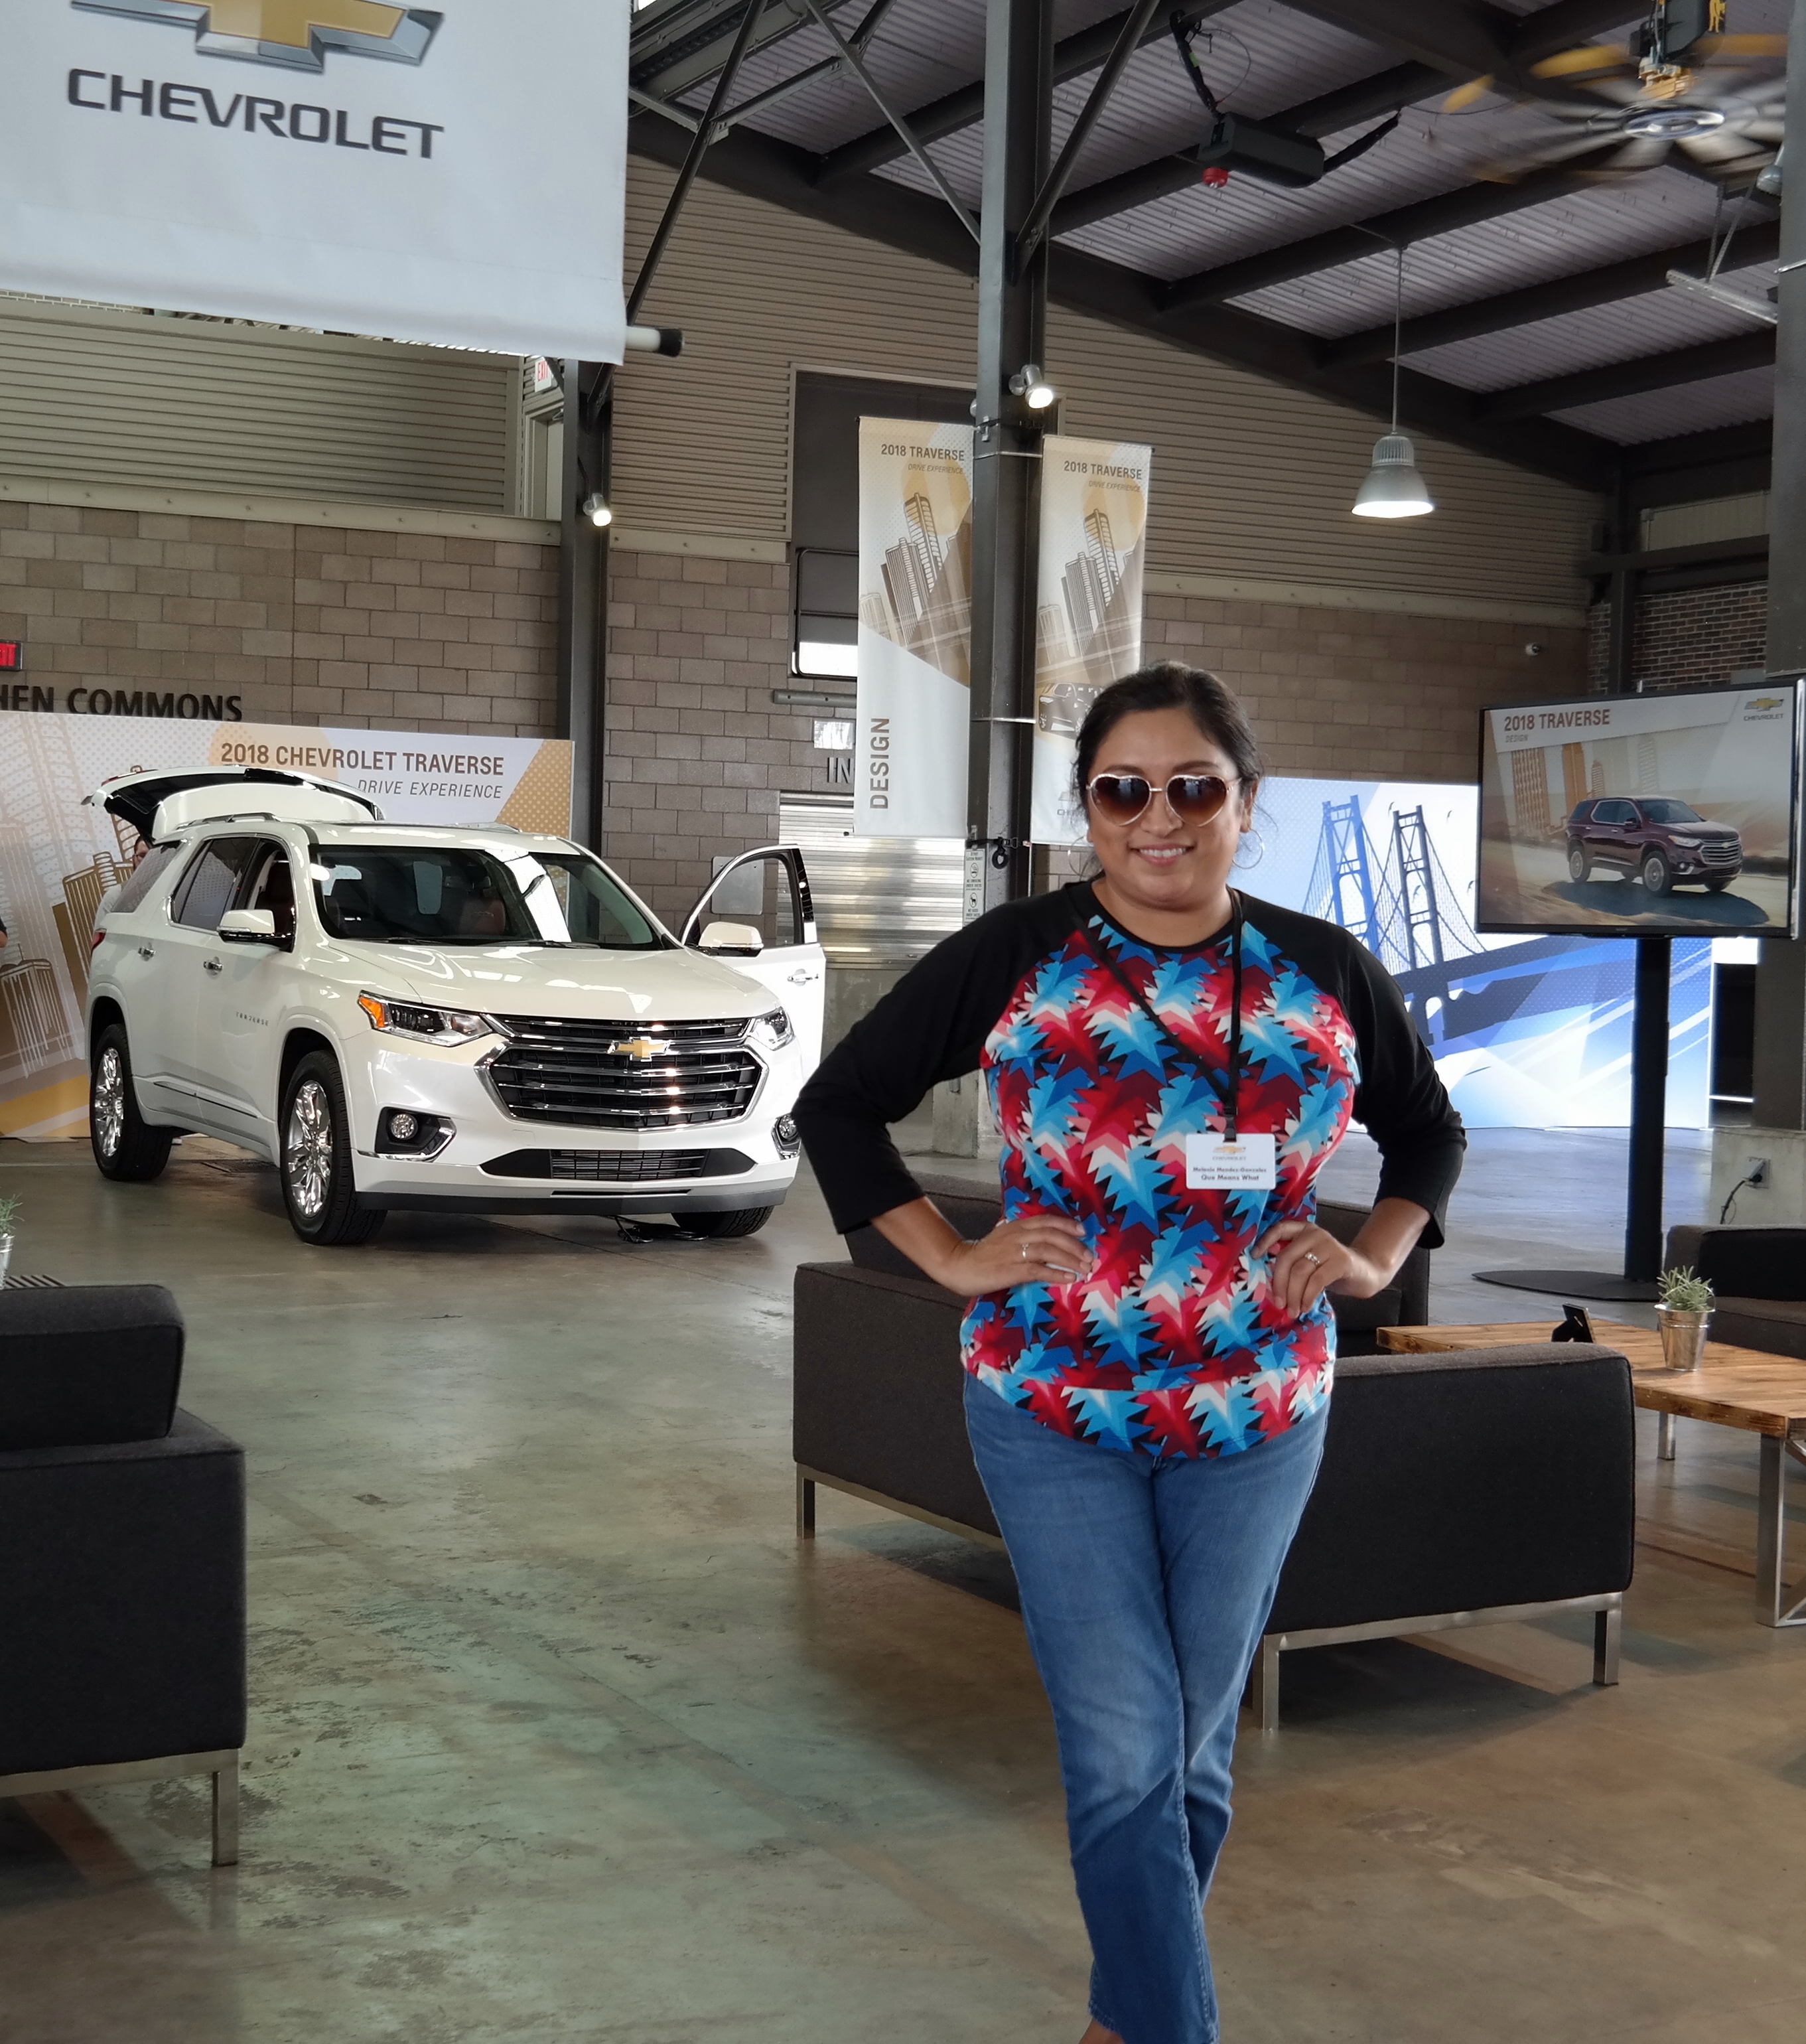 2018 Chevrolet Traverse Drive Experience